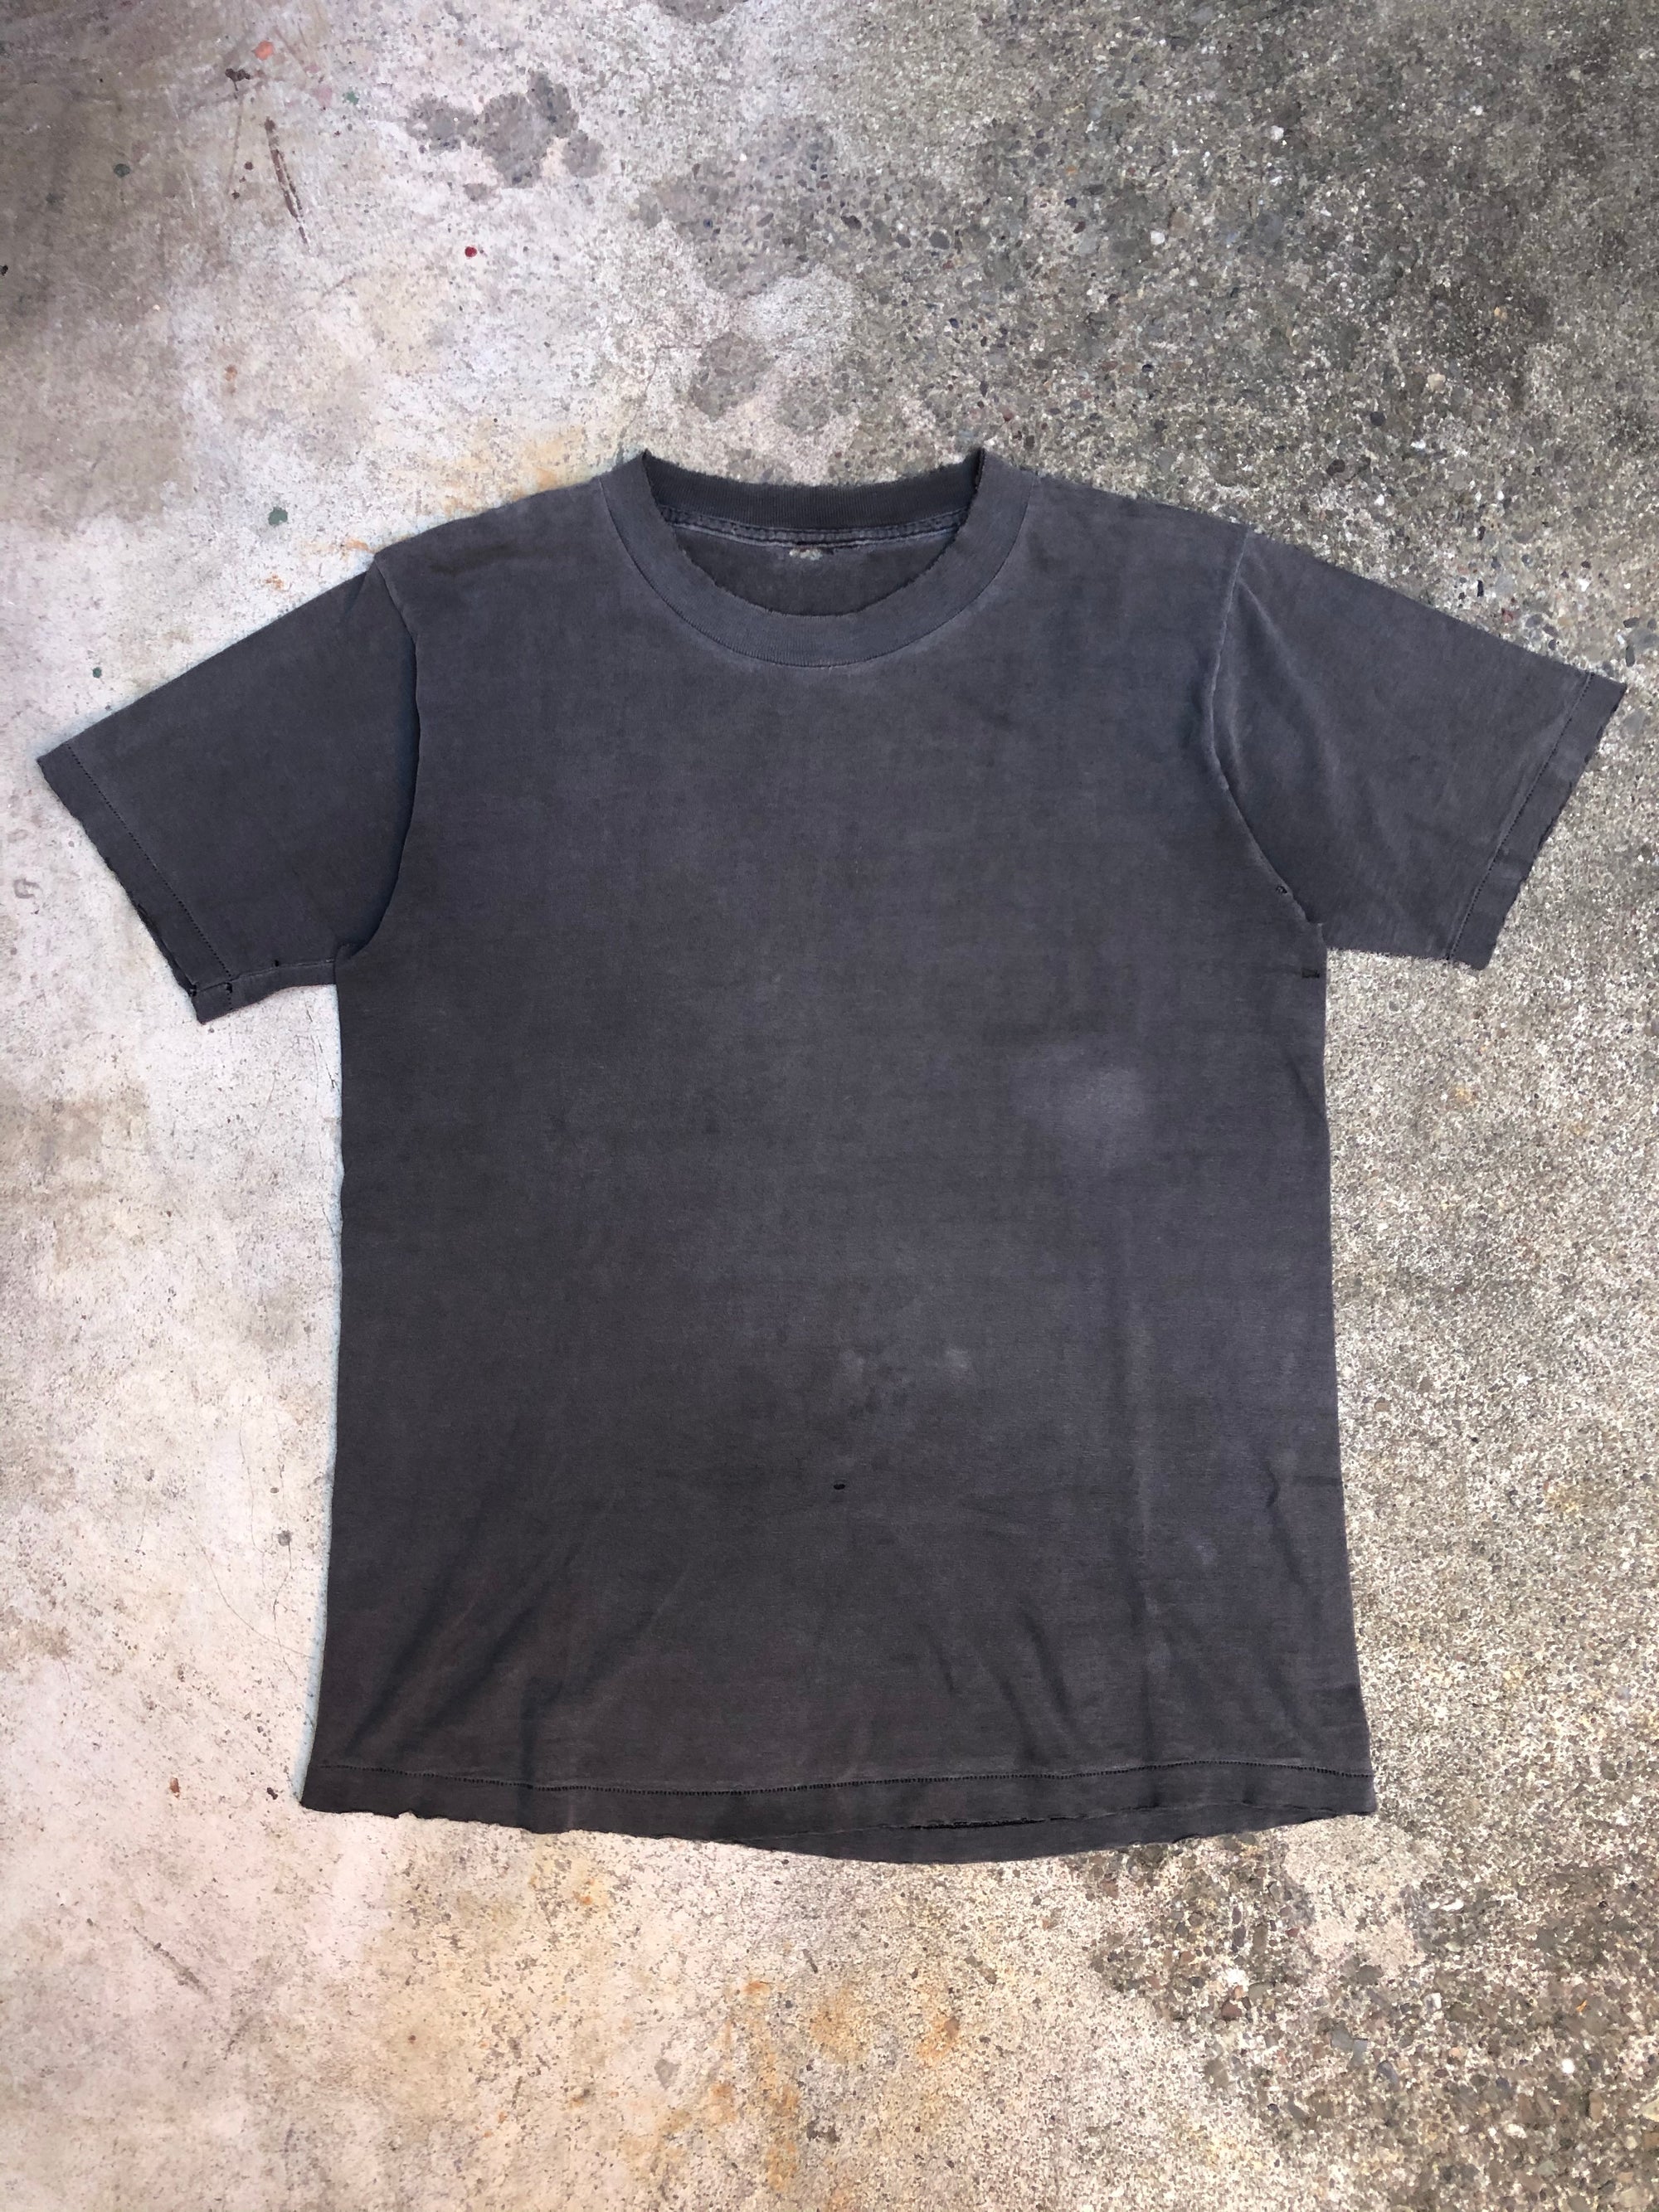 1990s Single Stitched Faded Black Blank Tee